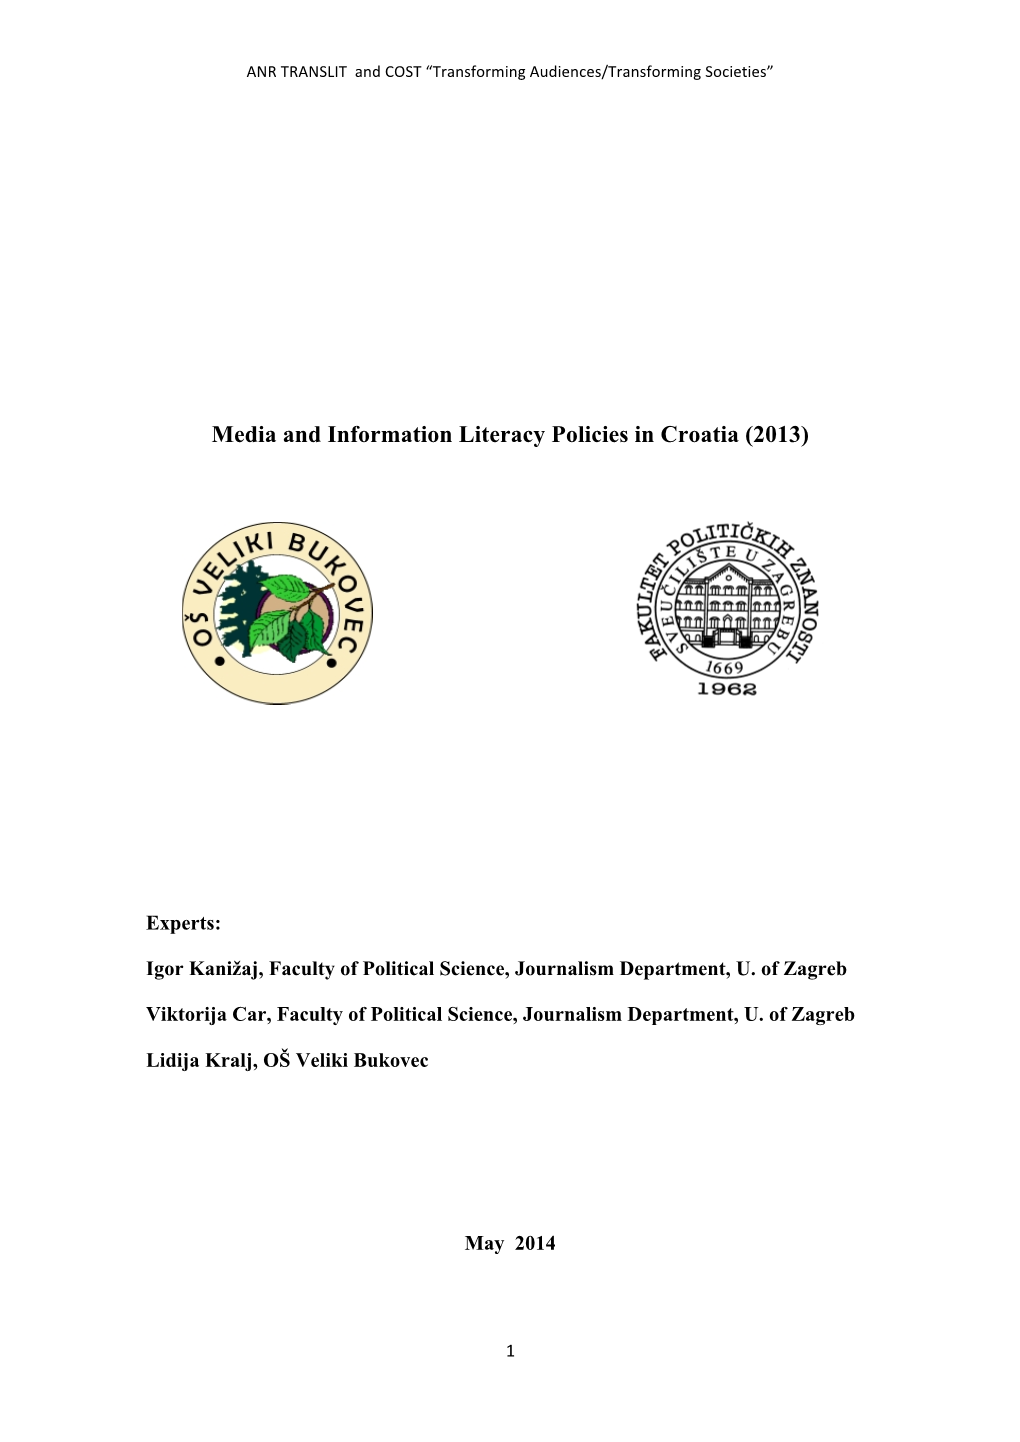 Media and Information Literacy Policies in Croatia (2013)